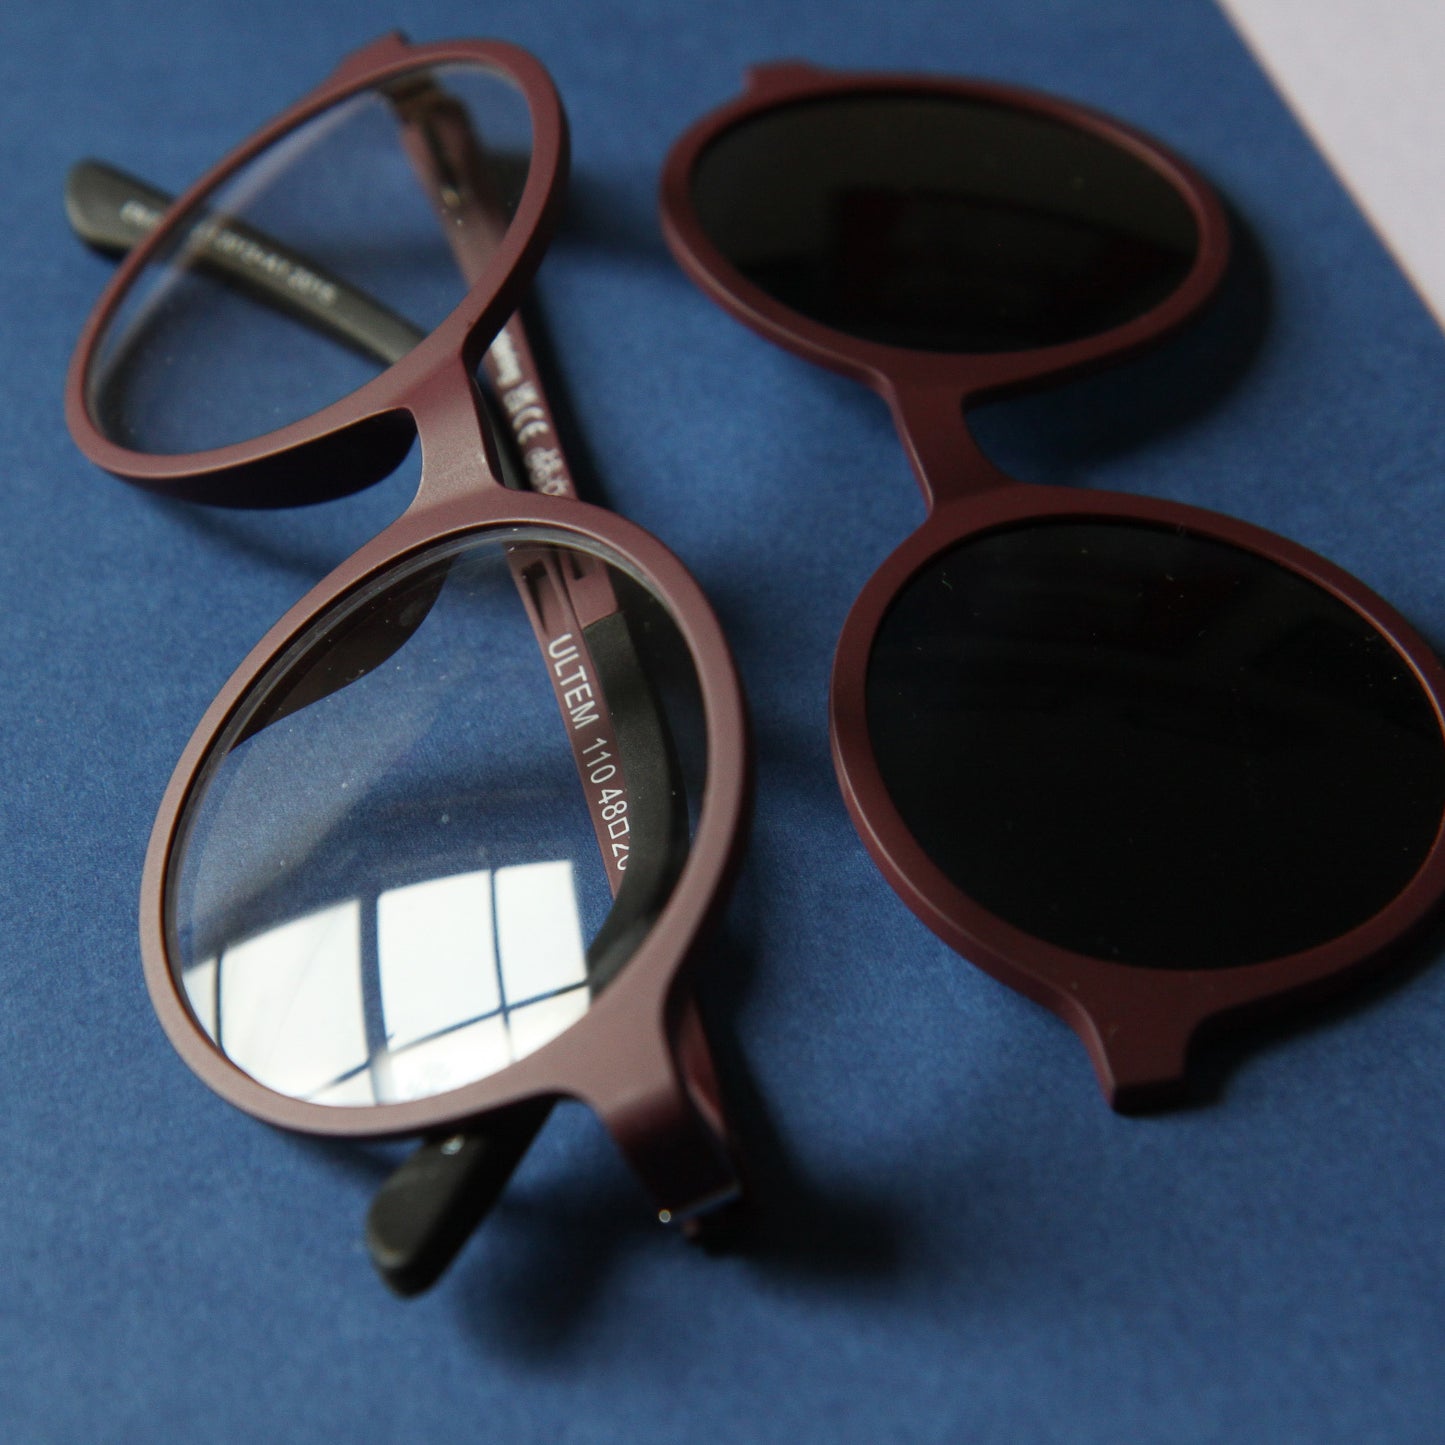 Maroon magnetic glasses & sunglasses in one